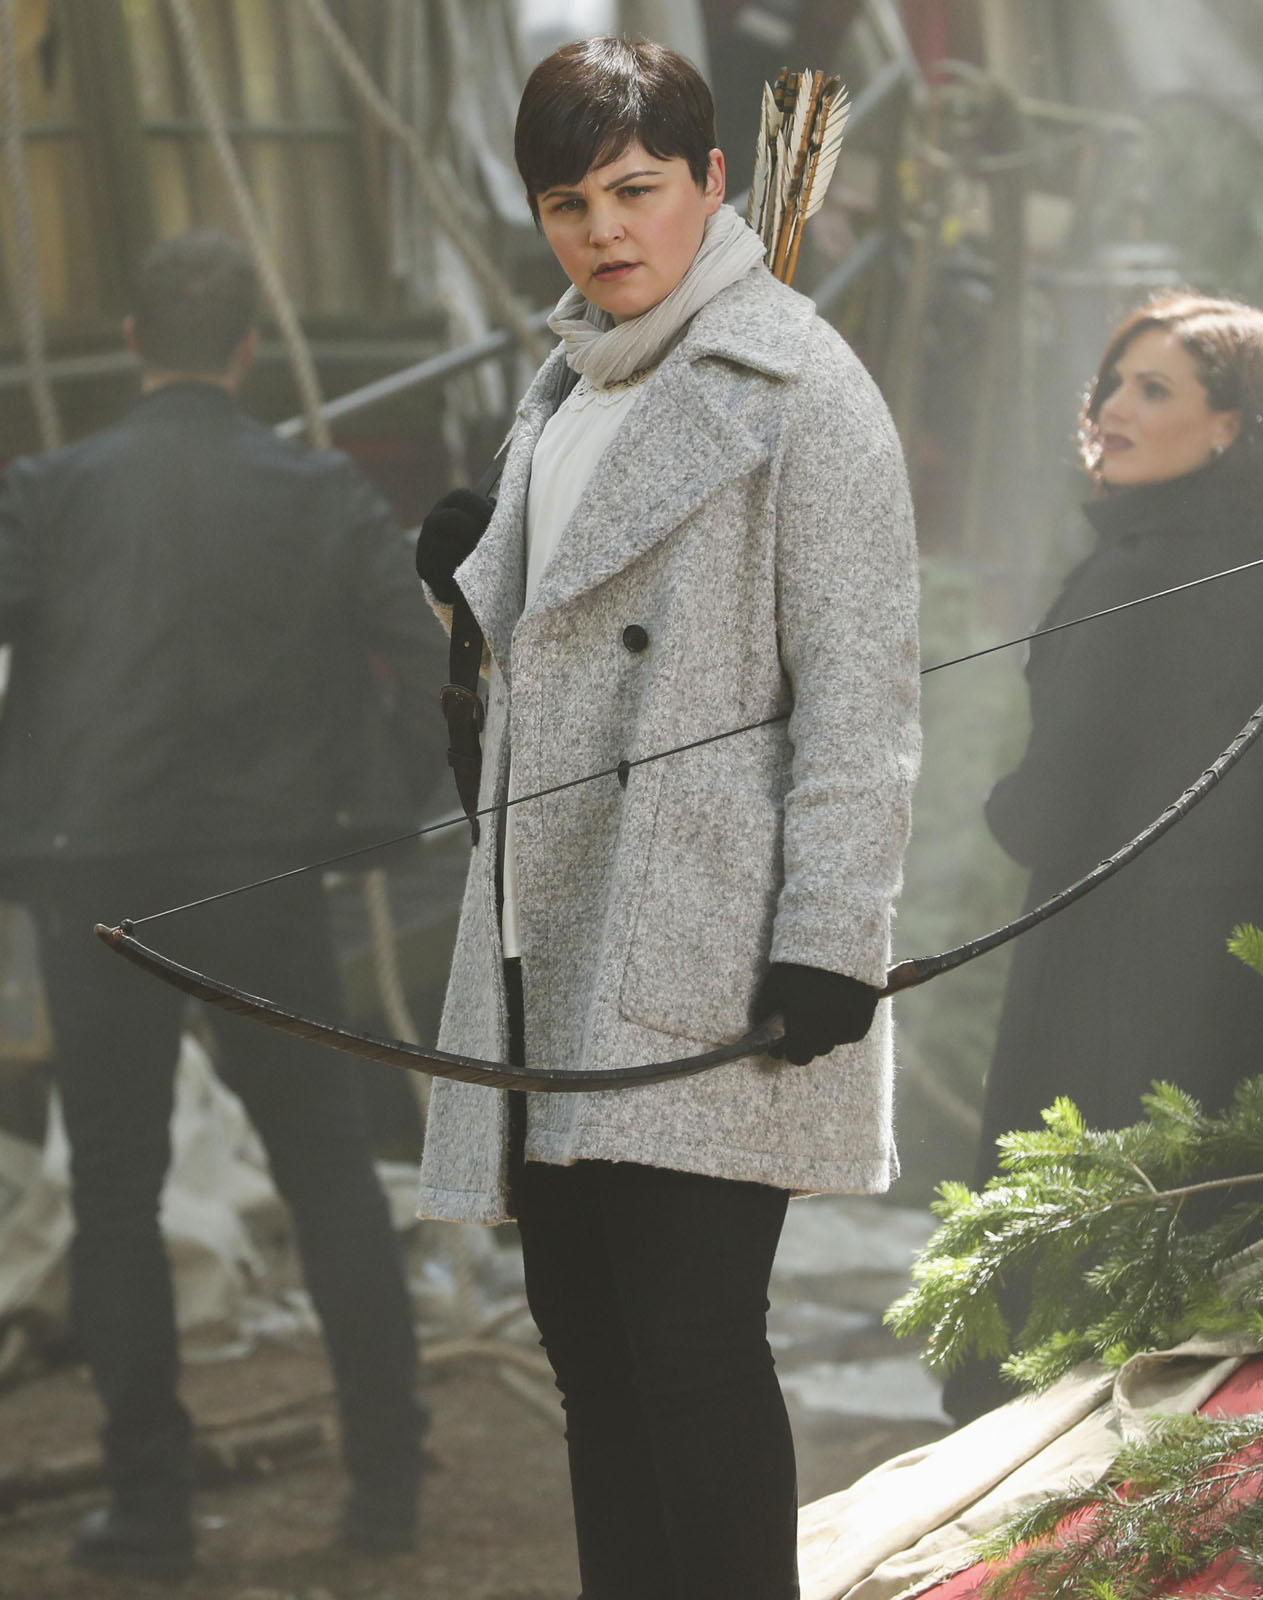 Once Upon A Time Once Upon A Time Photo Ginnifer Goodwin 248 Sur 1200 Allociné